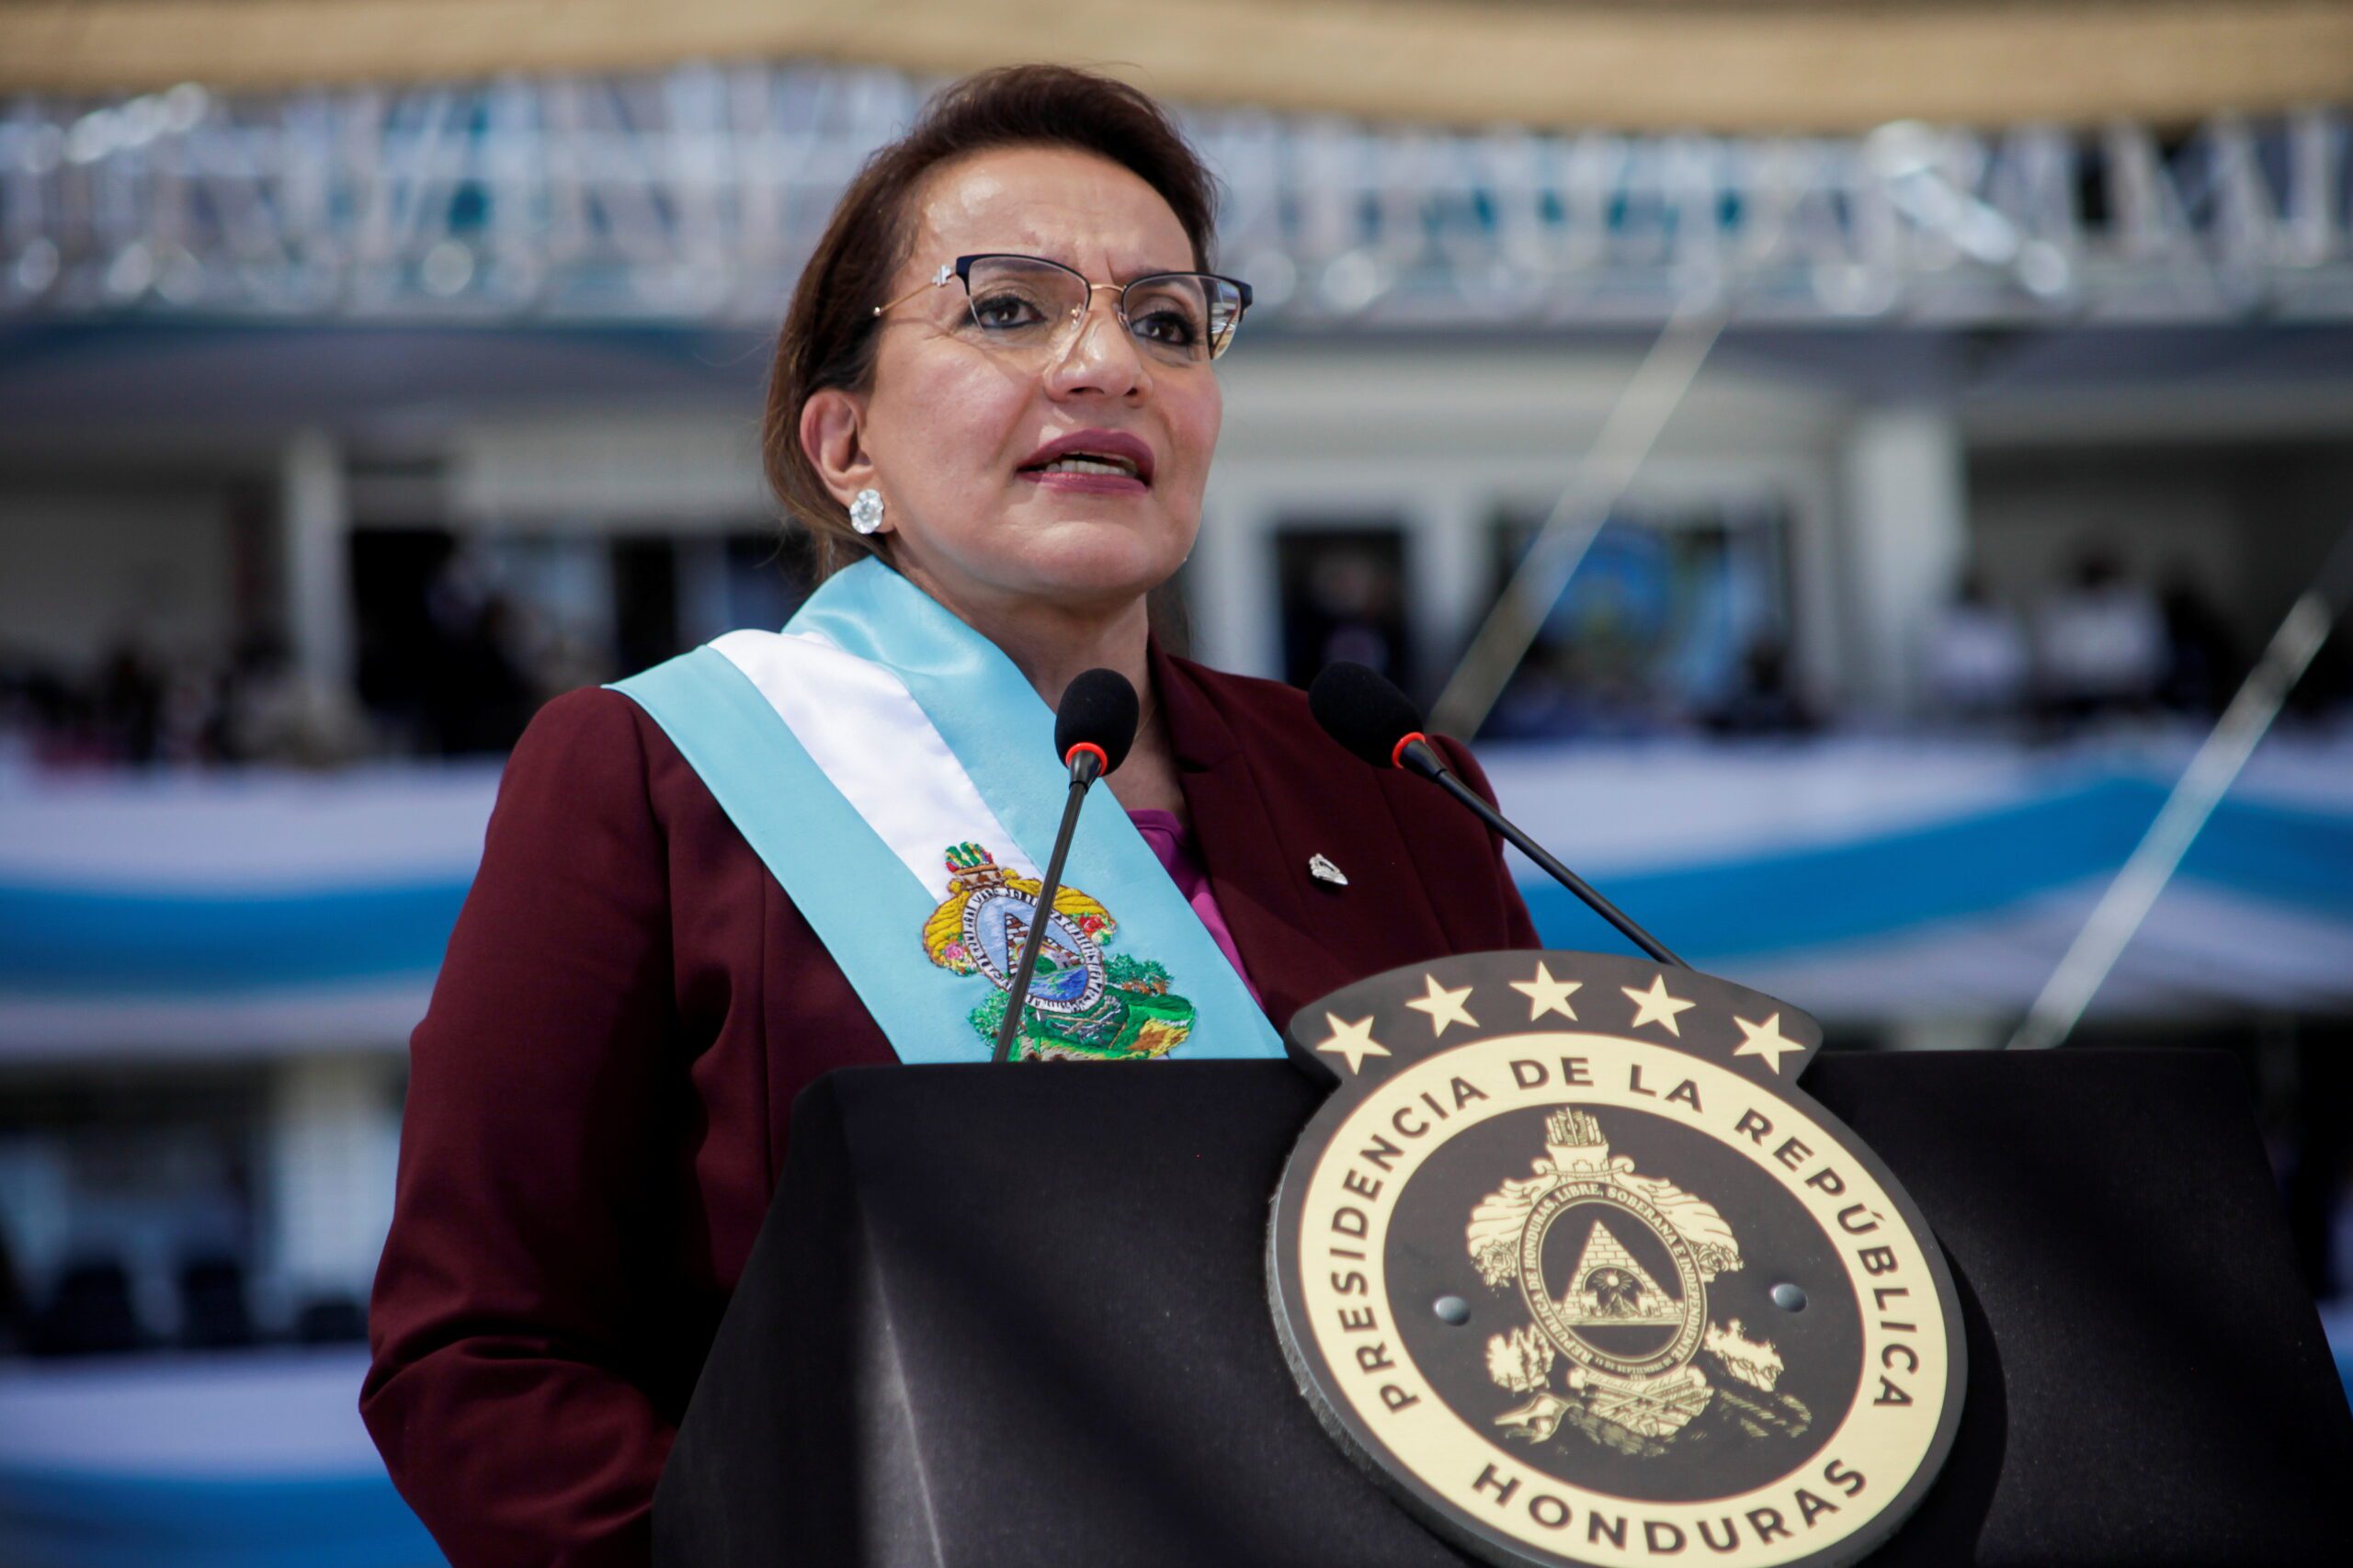 New Honduran President Xiomara Castro delivers a speech after being sworn-in during a ceremony in Tegucigalpa, Honduras January 27, 2022. REUTERS/Fredy Rodriguez